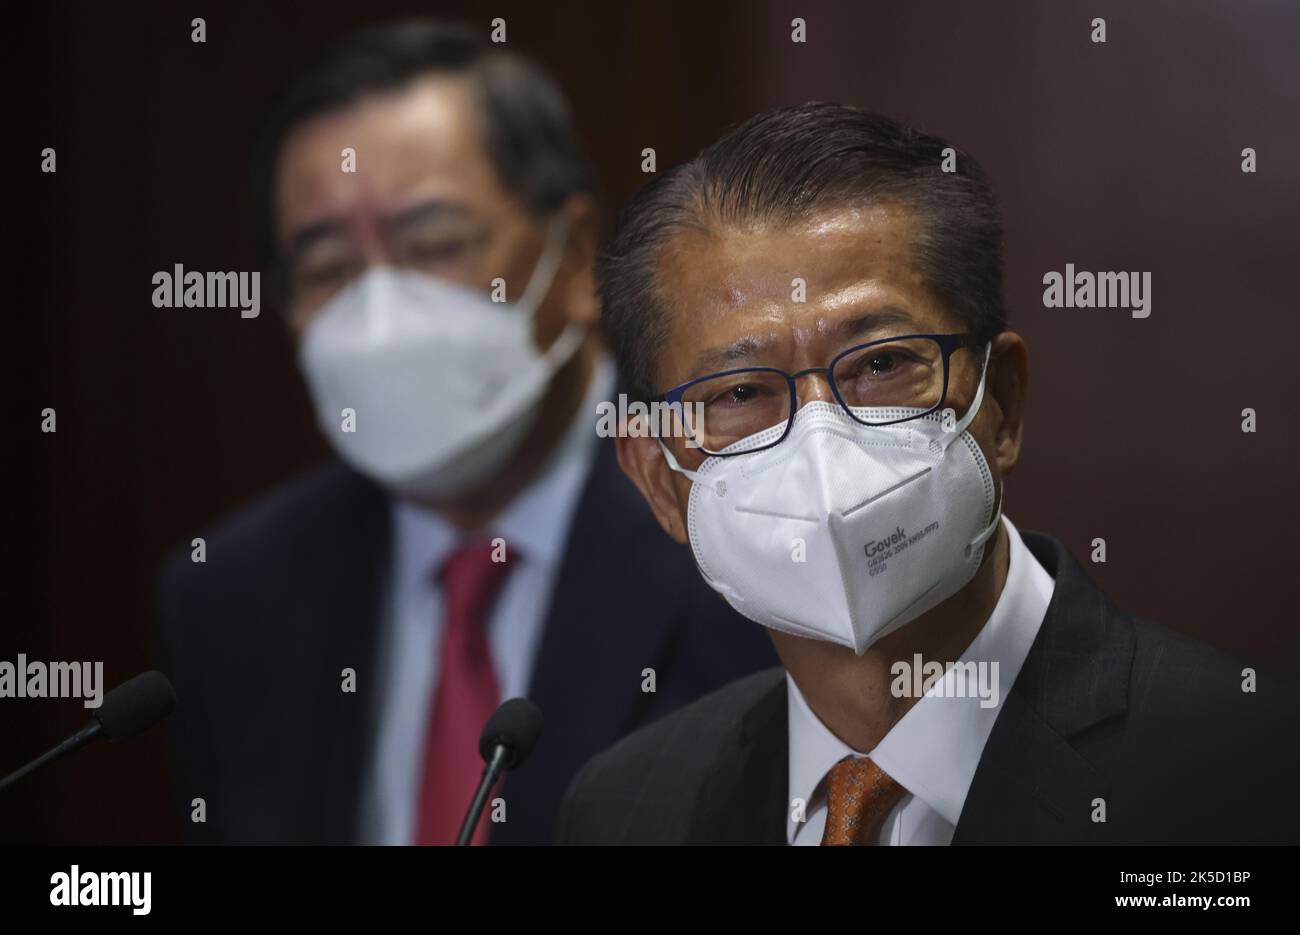 Legislative Council President Andrew Leung Kwan-yuen (Left) and Financial Secretary Paul Chan Mo-po meet the media after Ante Chamber Exchange Session at Legco Building in Tamar.05OCT22 SCMP/ Edmond So Stock Photo